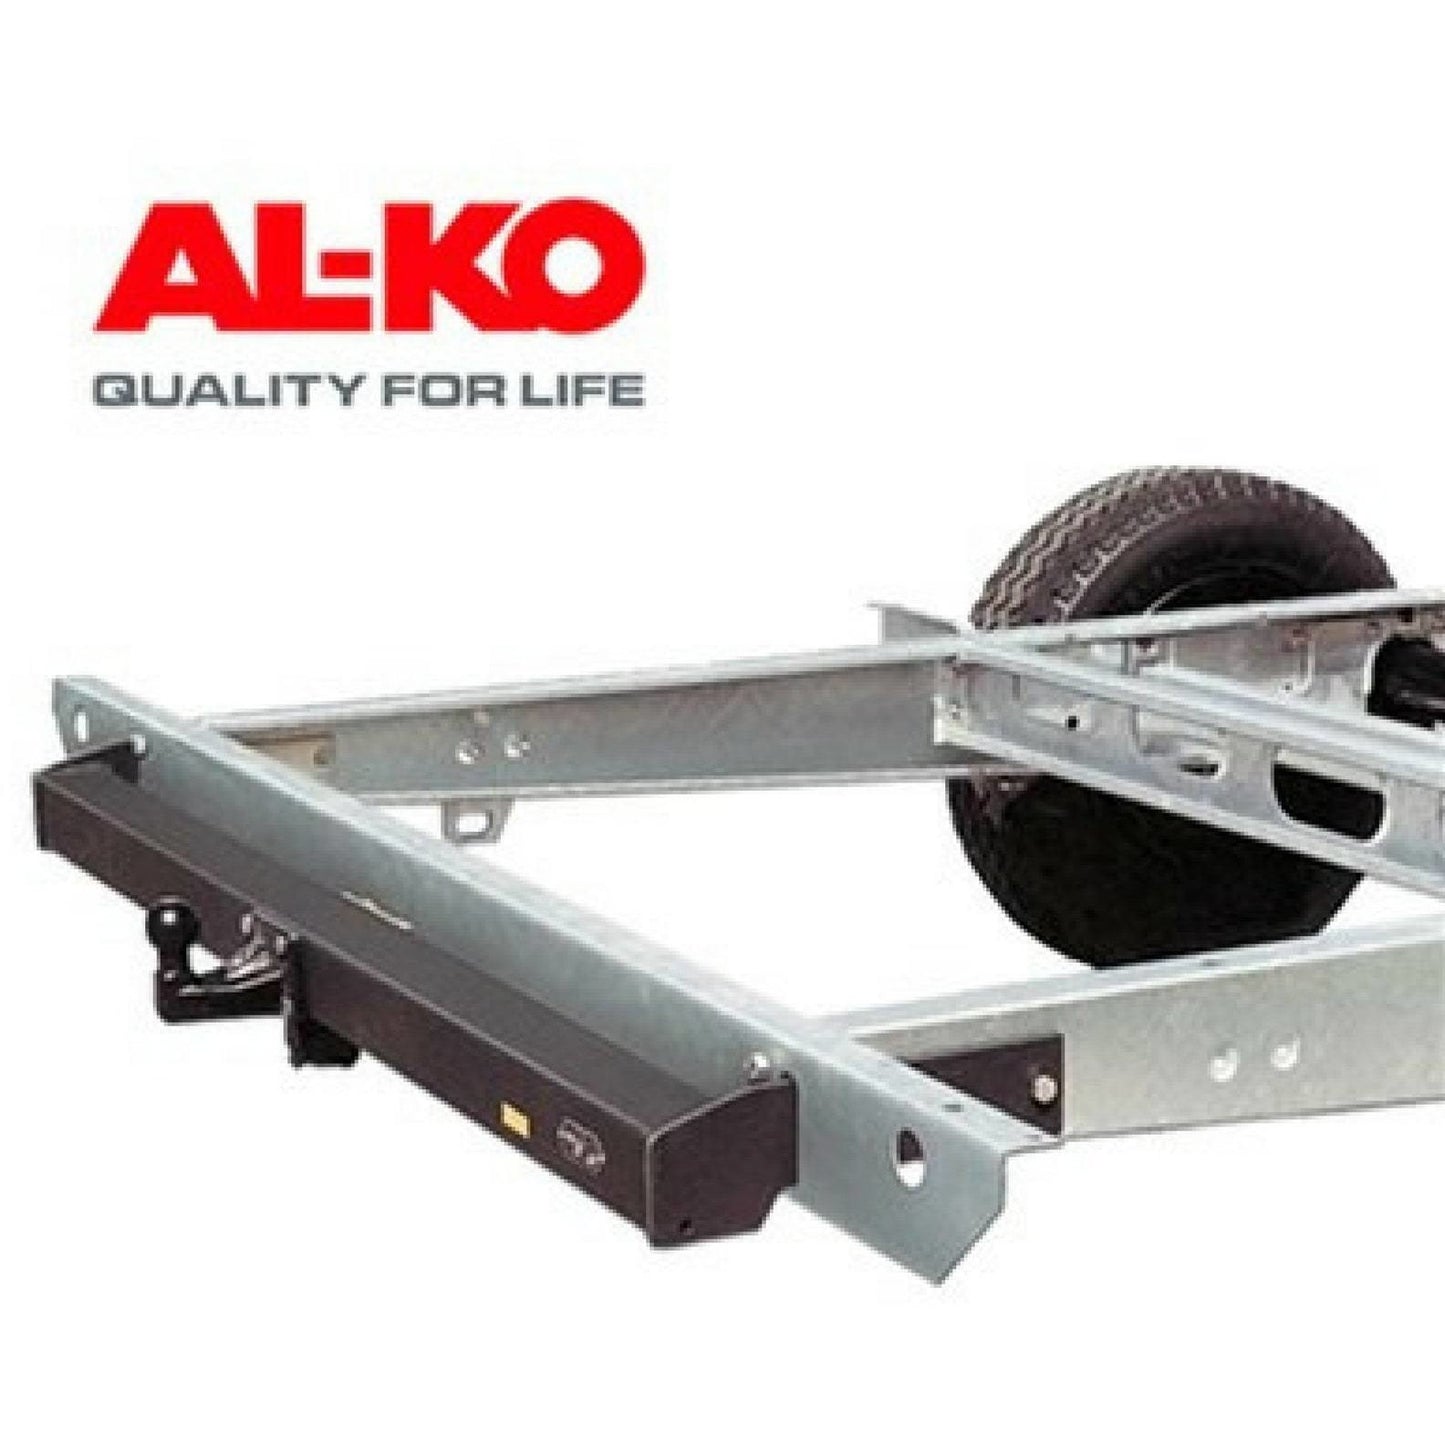 ALKO Towbar Assembly (1202118) made by ALKO. A Towing sold by Quality Caravan Awnings